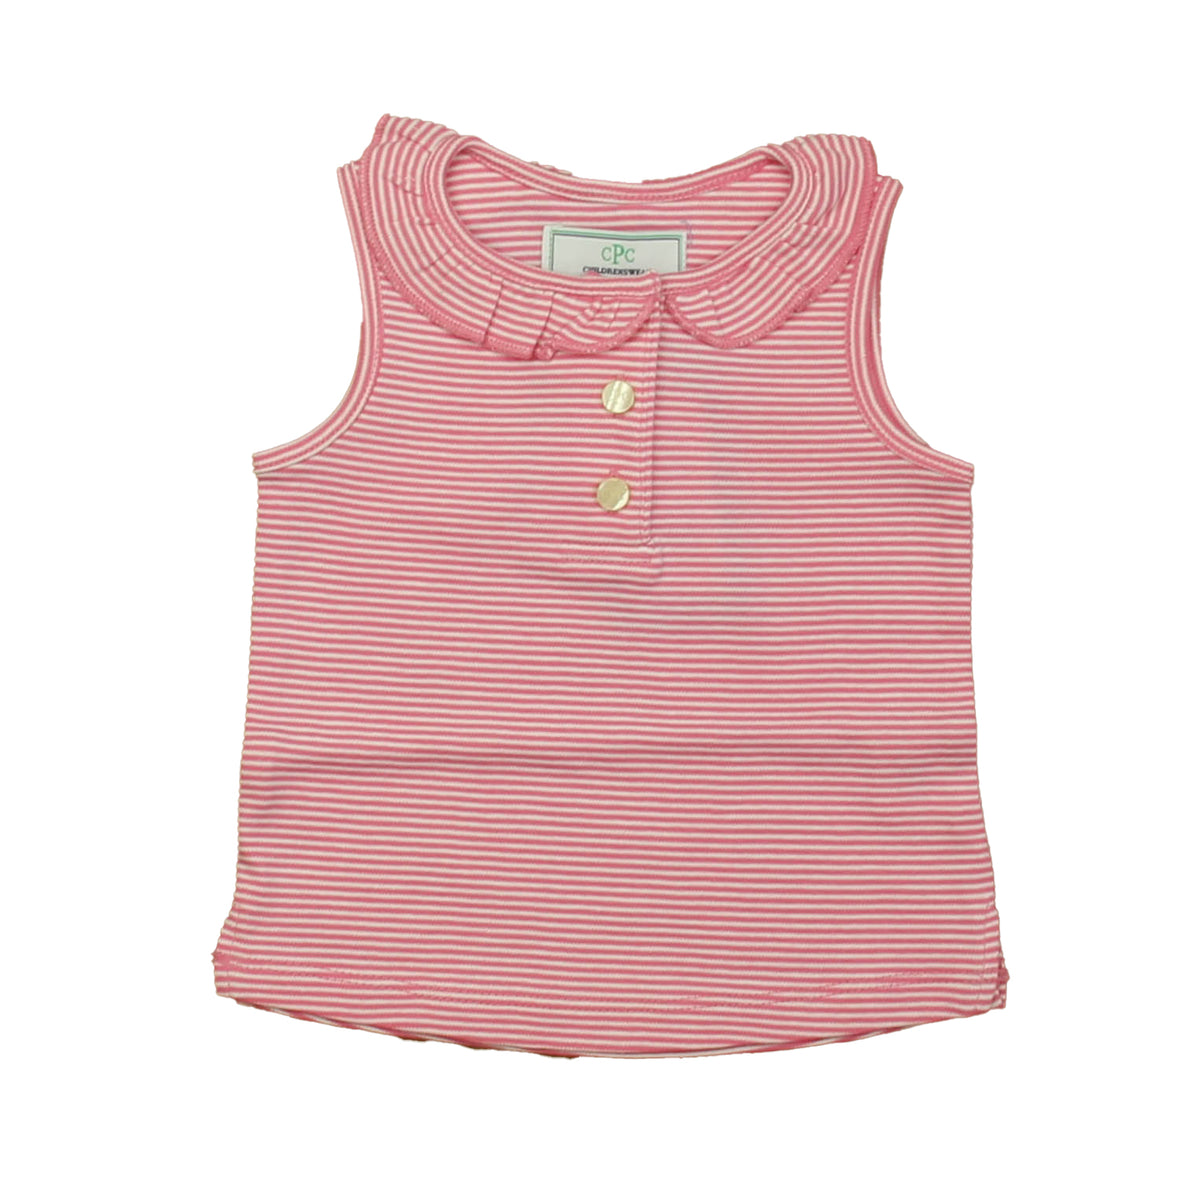 New with Tags: Pink and White Stripe Top -- FINAL SALE